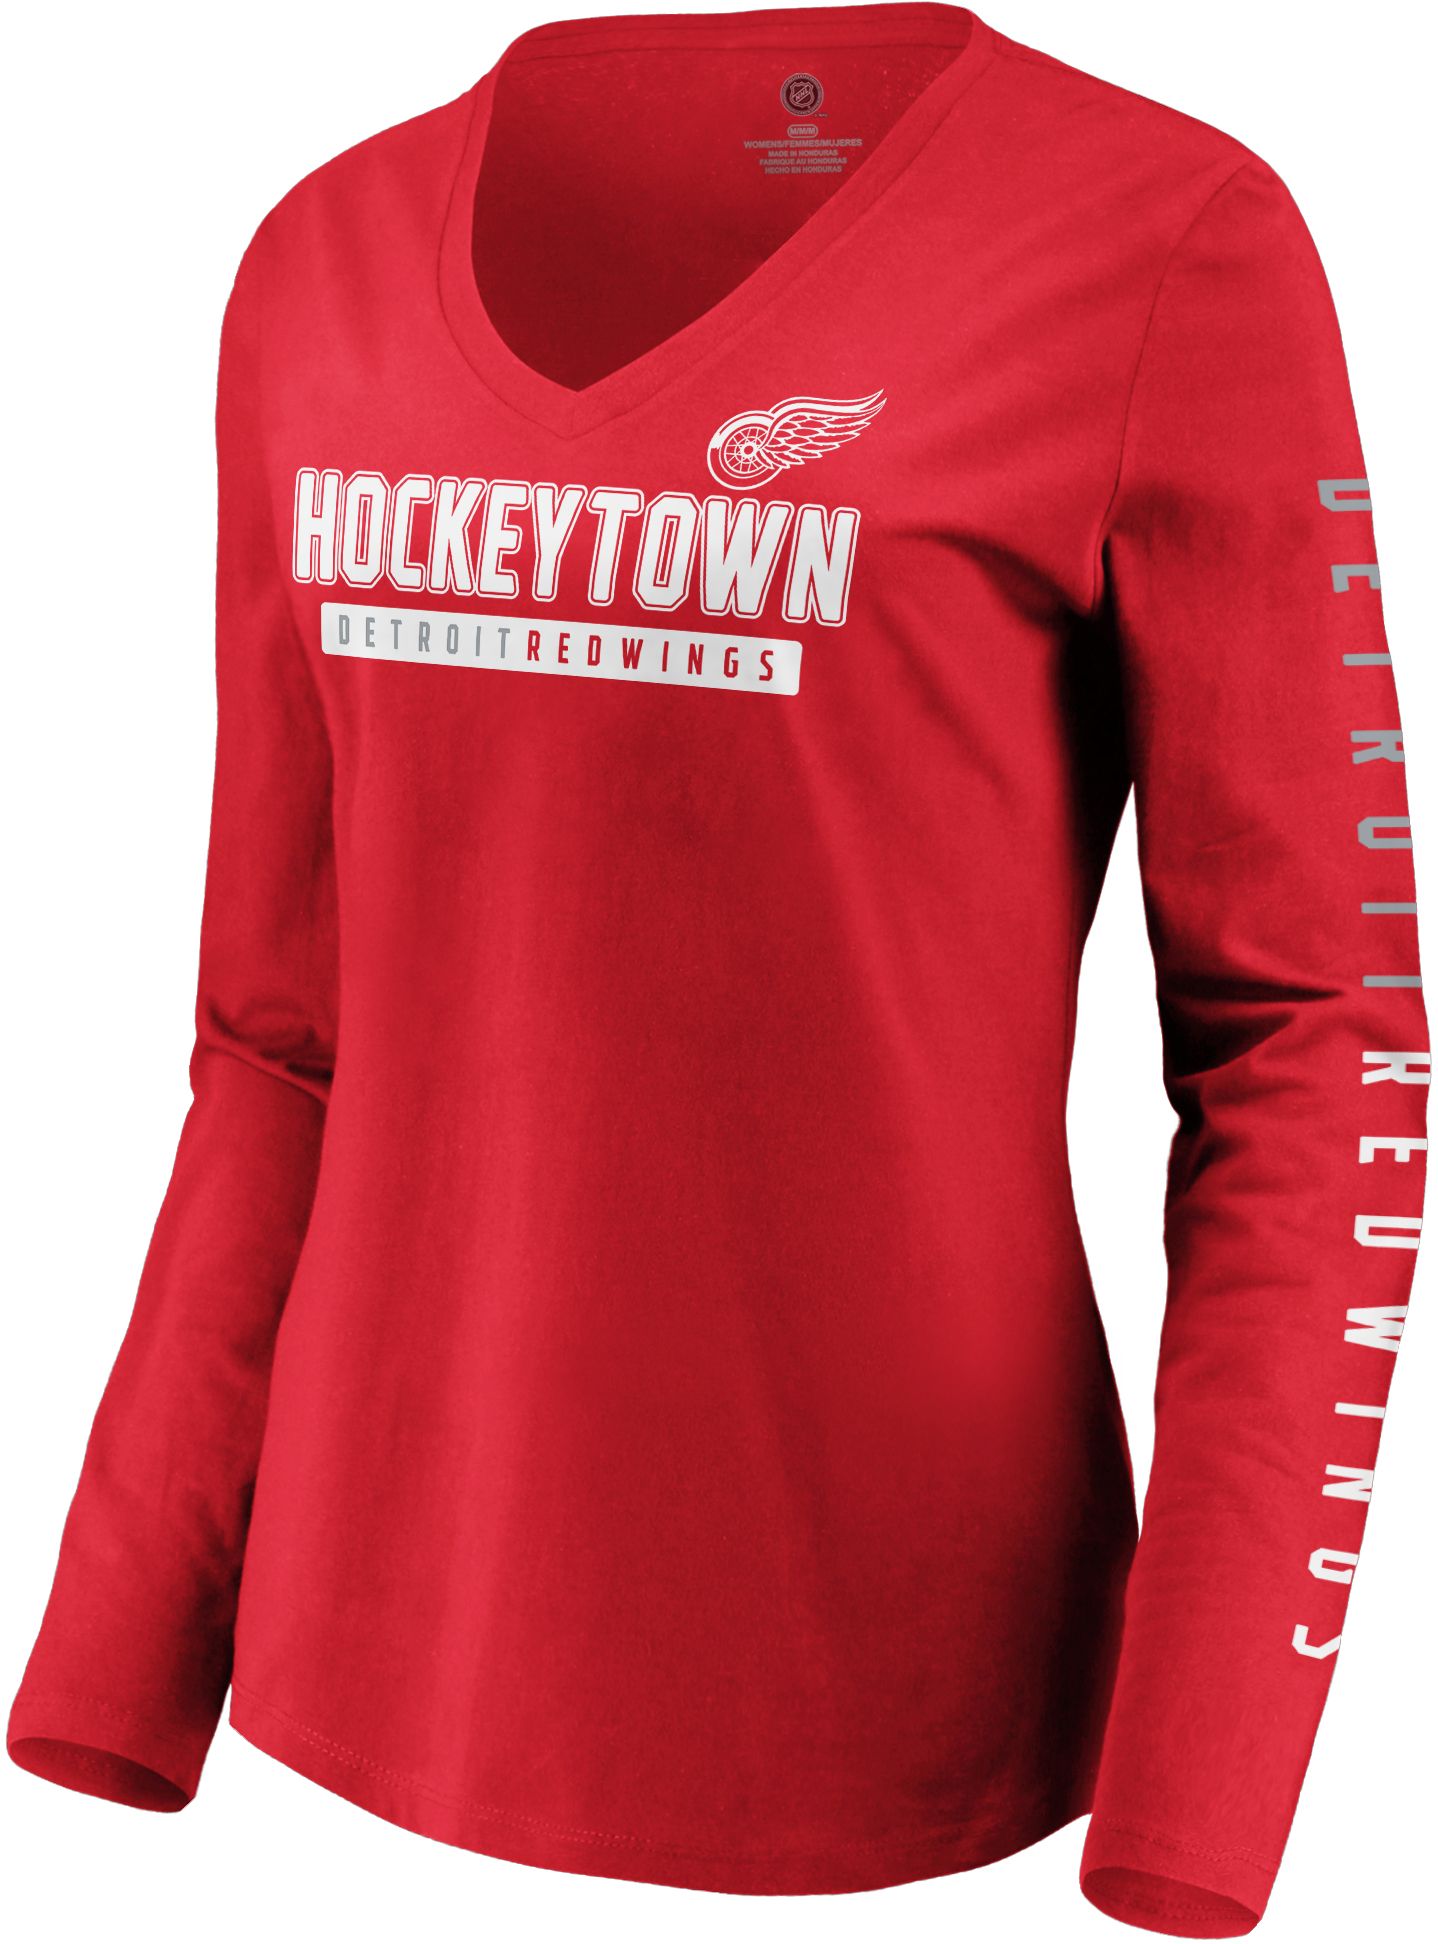 detroit red wings womens shirts